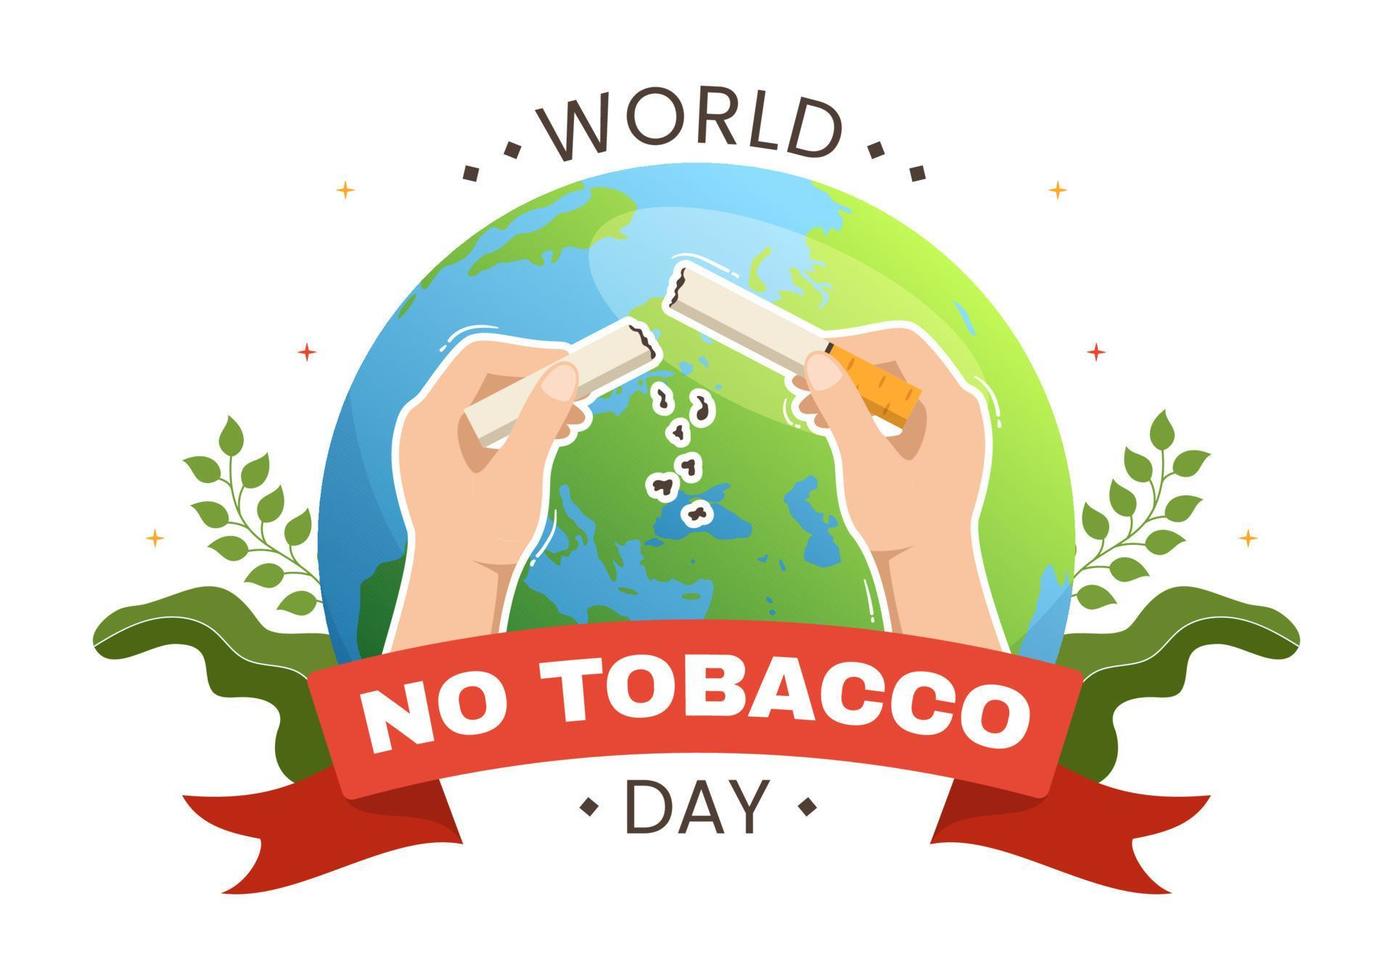 World No Tobacco Day Illustration of Stop Smoking, Cigarette Butt and Harm the Lungs in Flat Cartoon Hand Drawn for Landing Page Templates vector